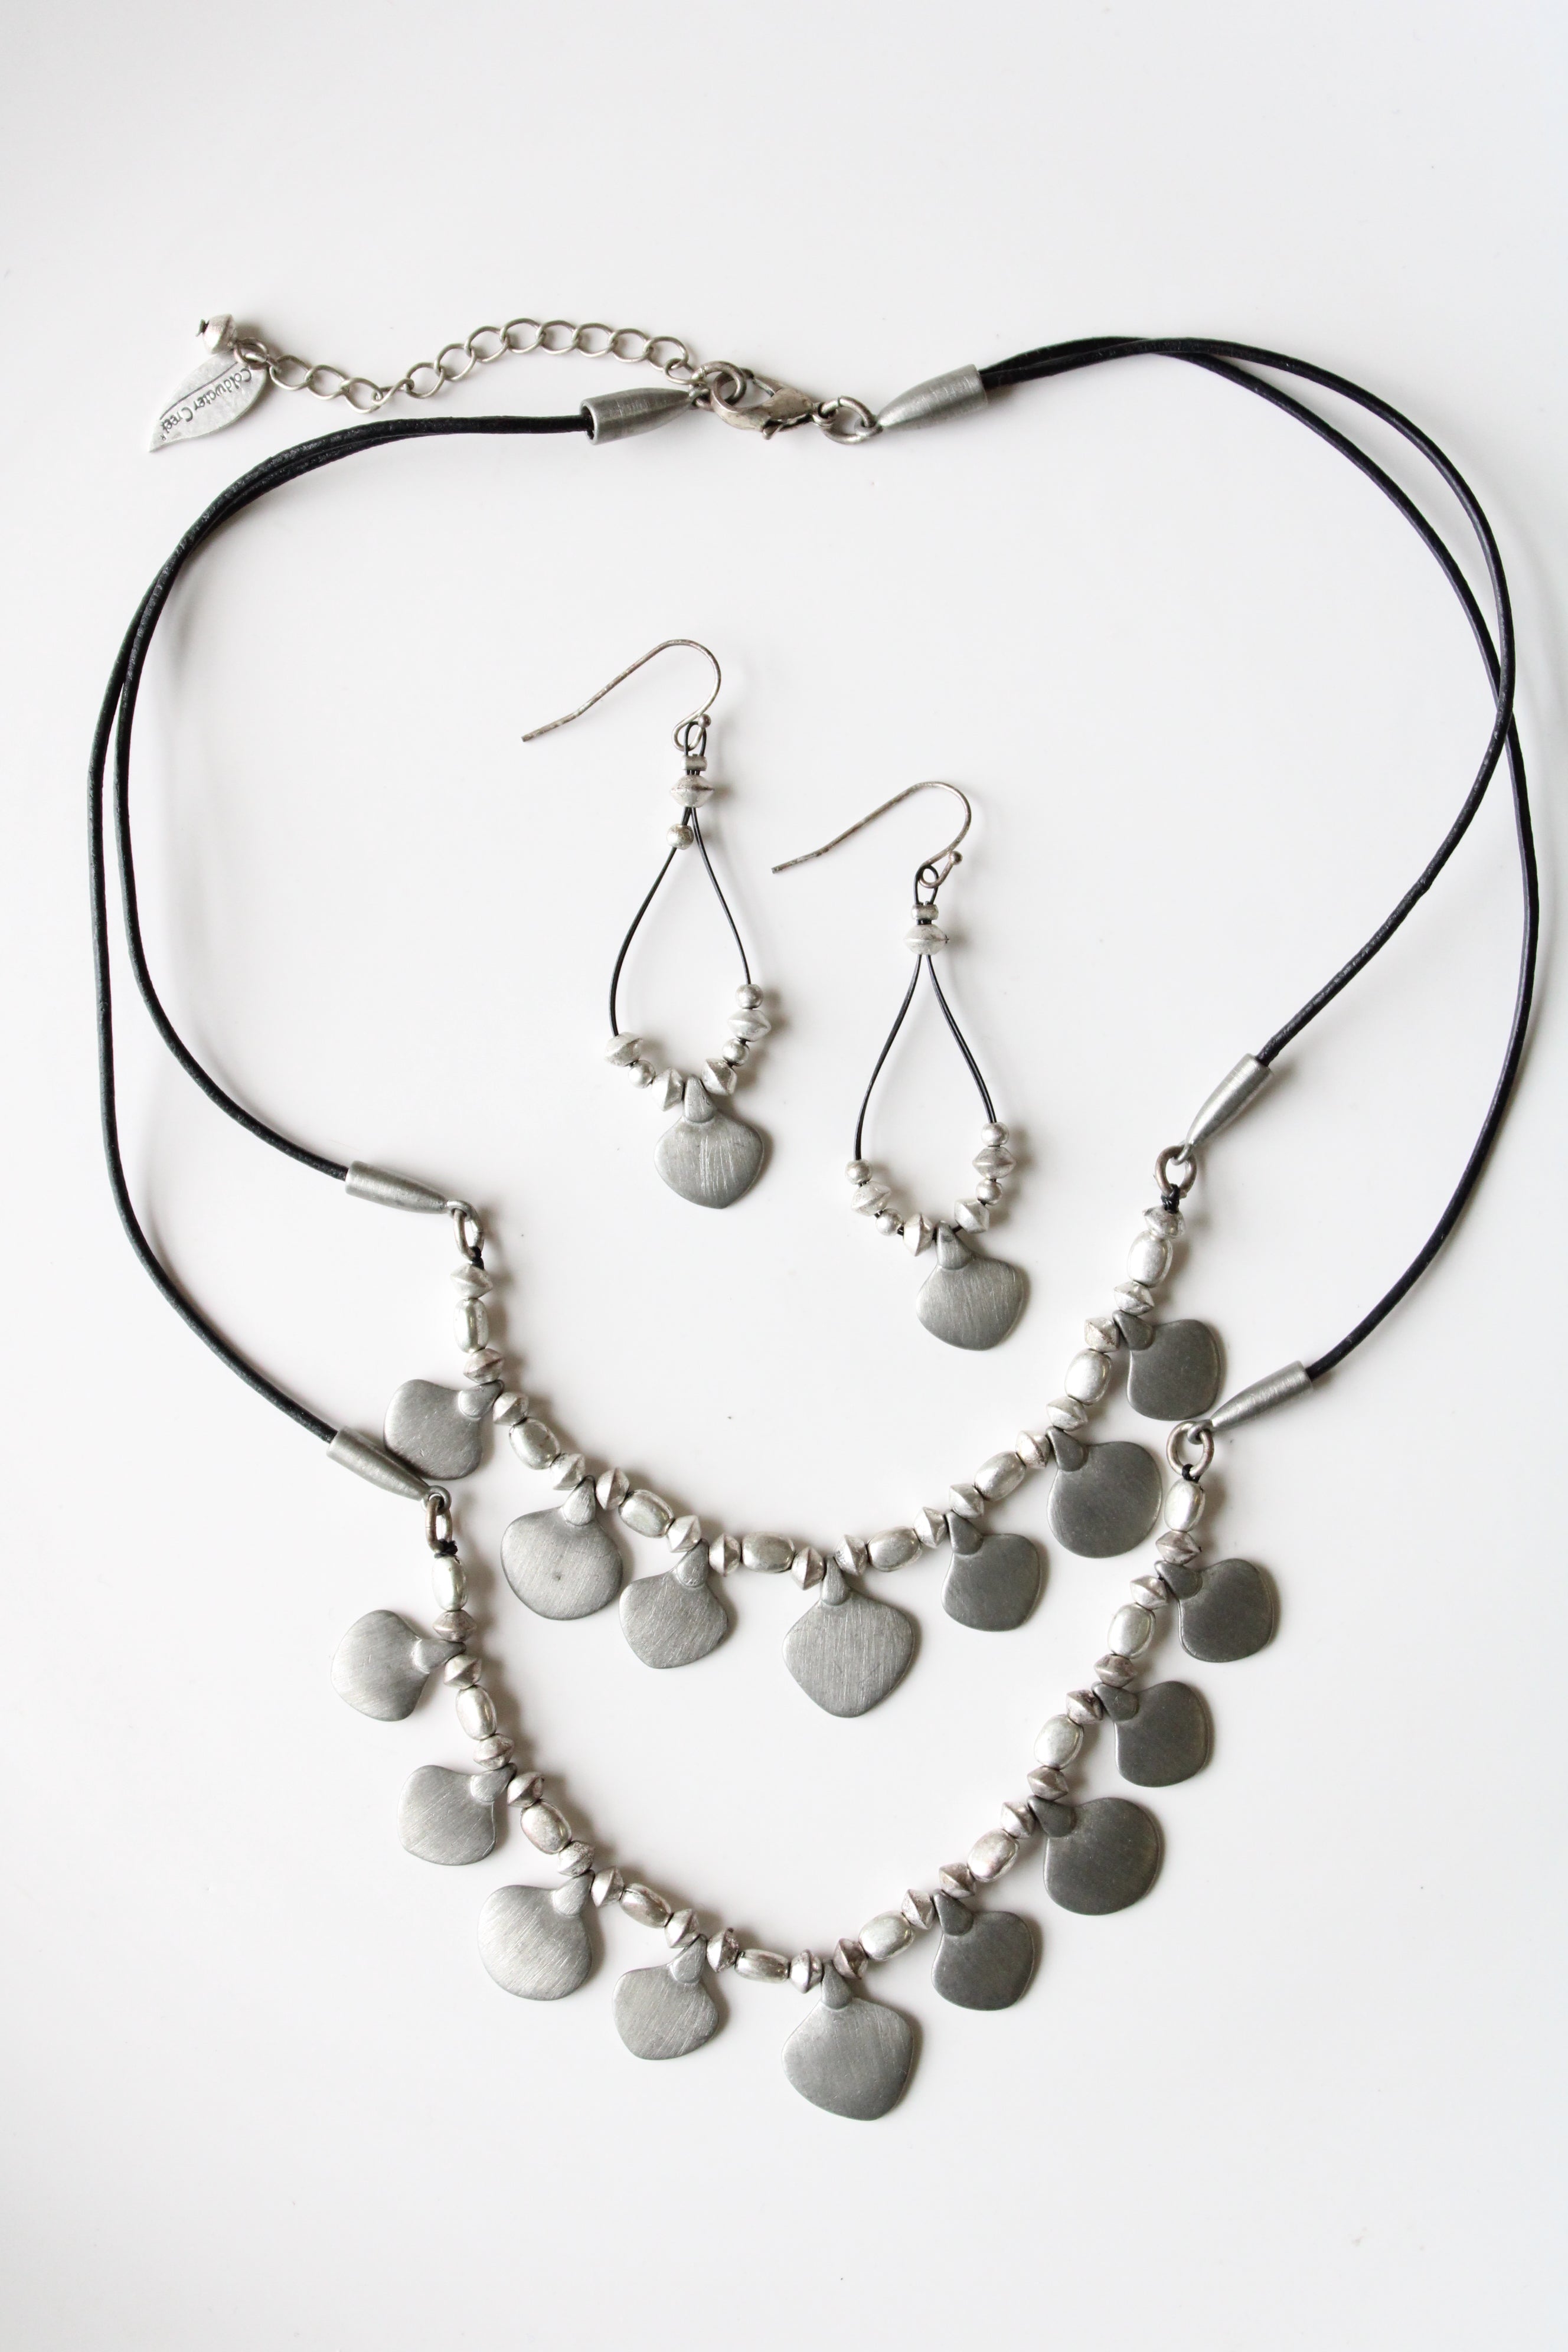 Coldwater Creek Silver Beaded Statement Necklace & Earring Set